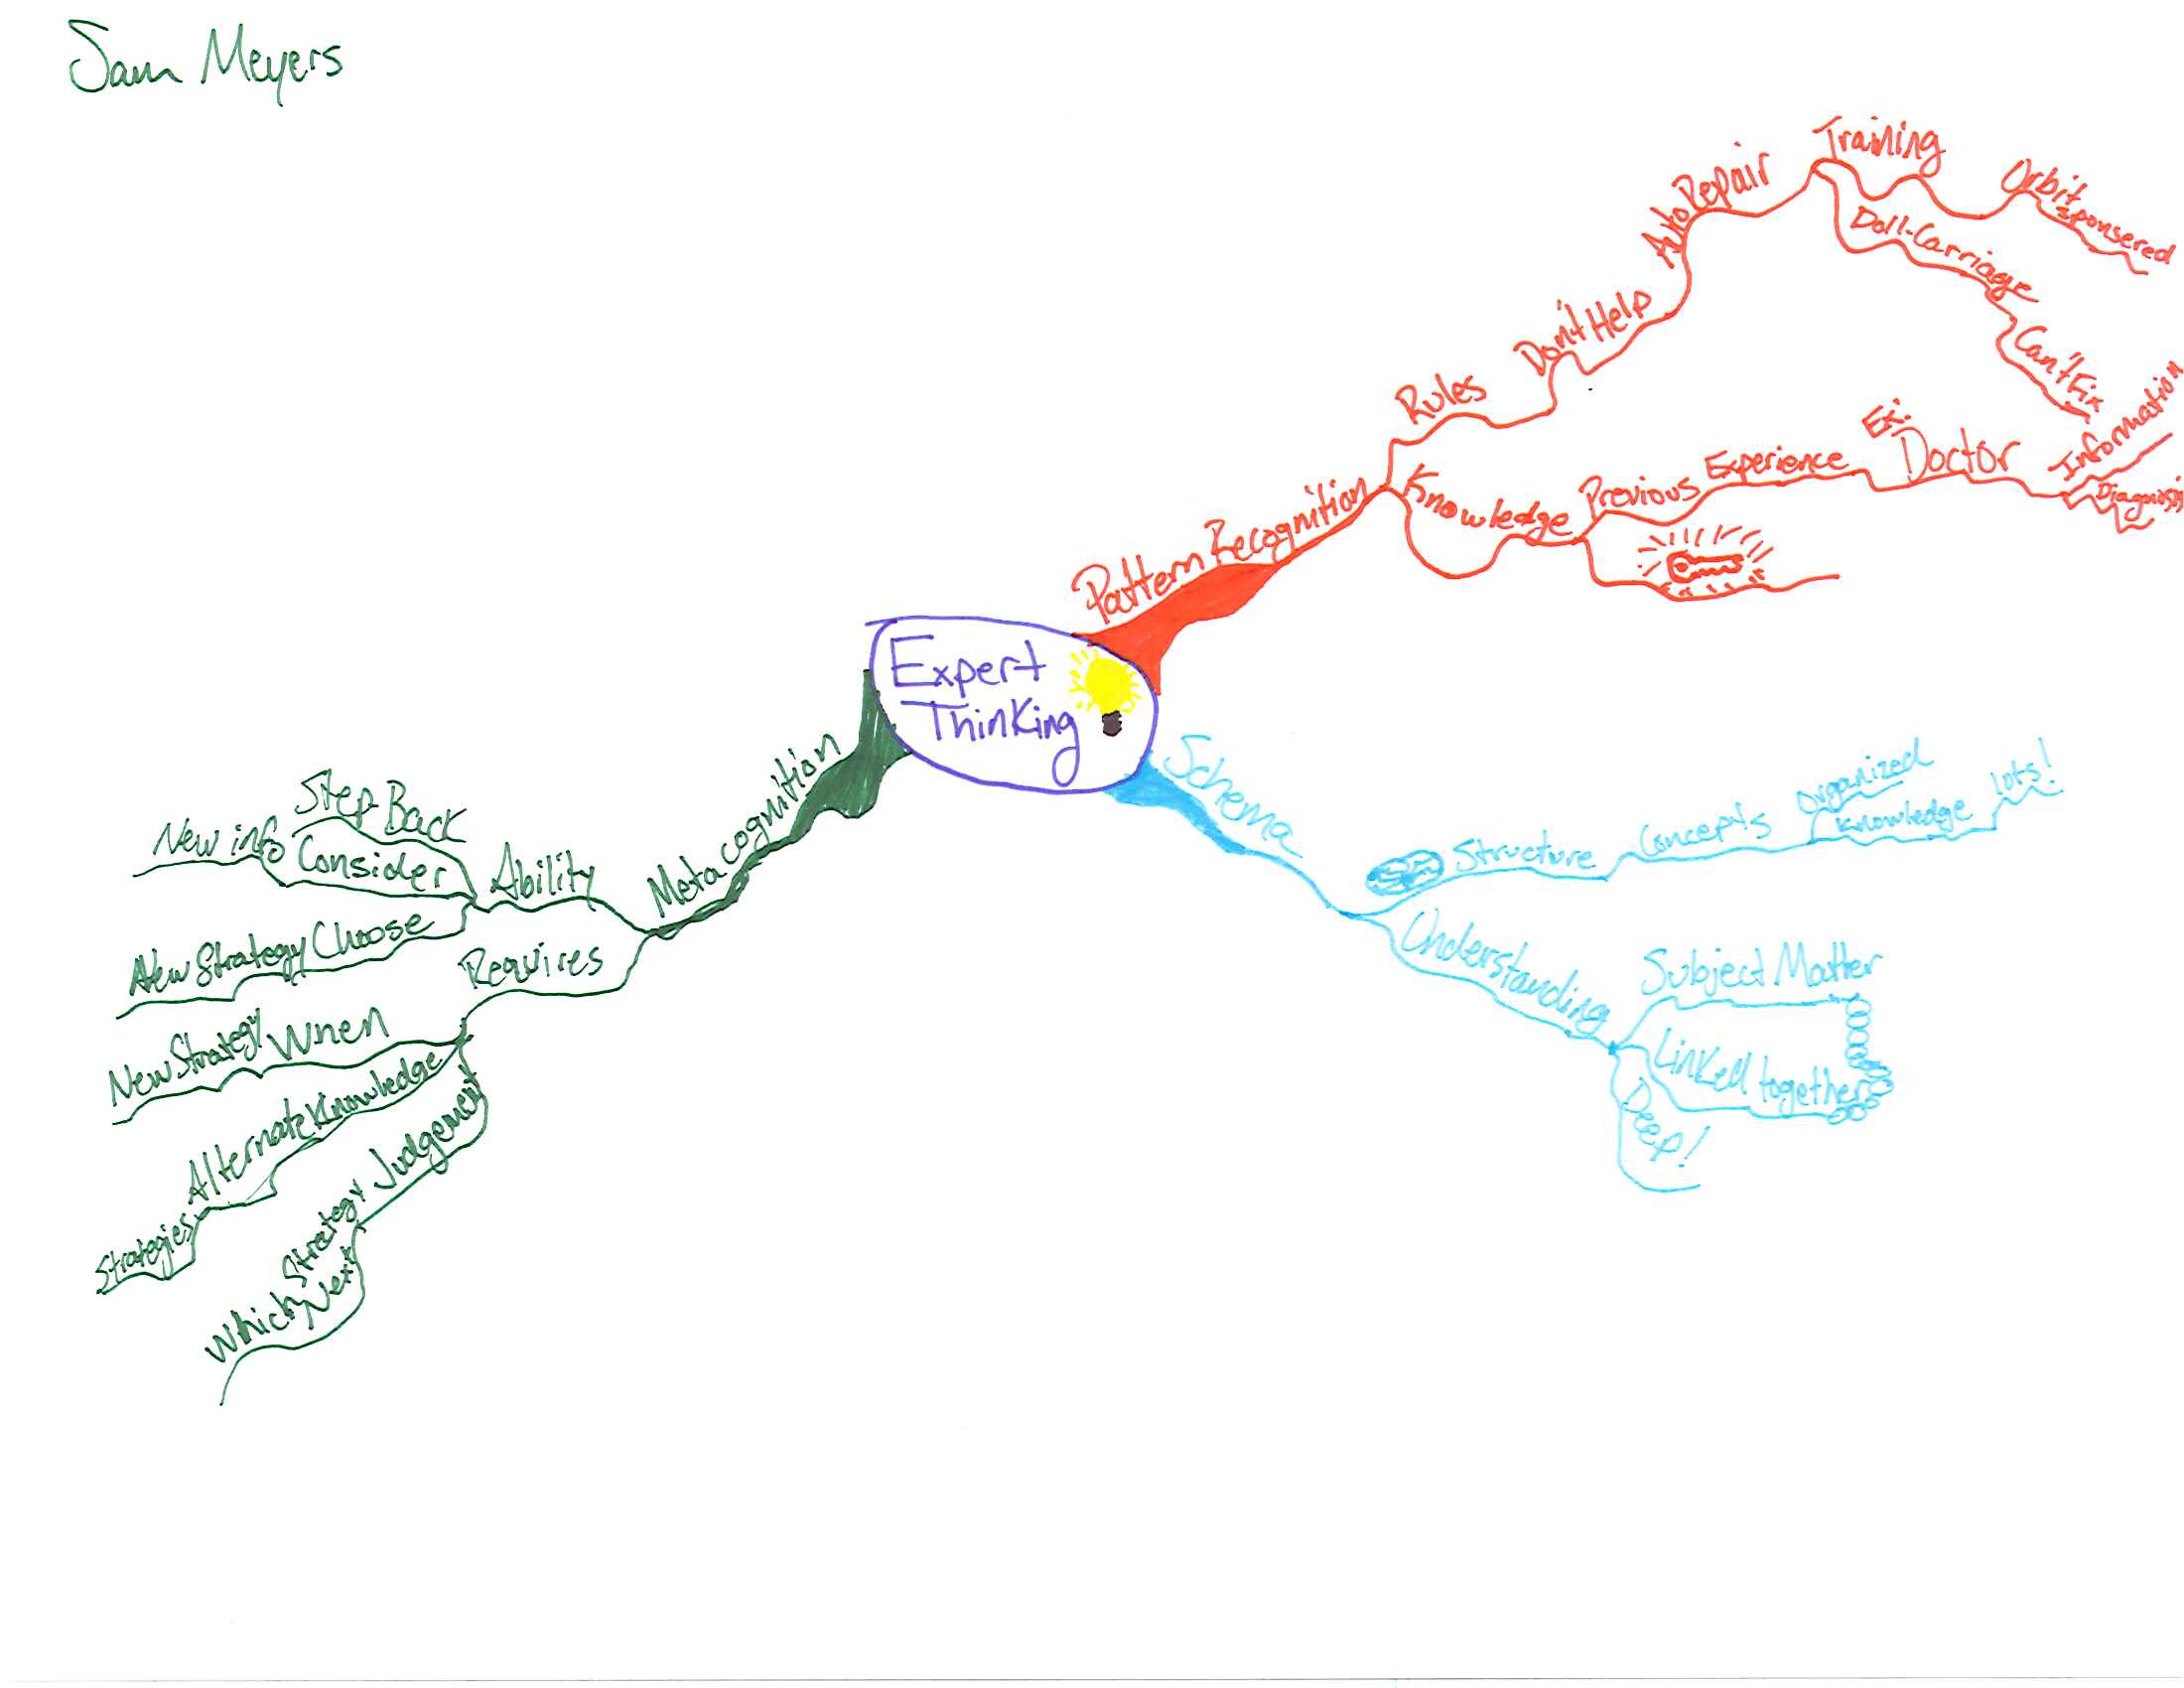 Sam-Meyers-Idea-Map-or-Mind-Map-of-Expert-Thinking Sam-Meyers-Idea-Map-or-Mind-Map-of-Expert-Thinking